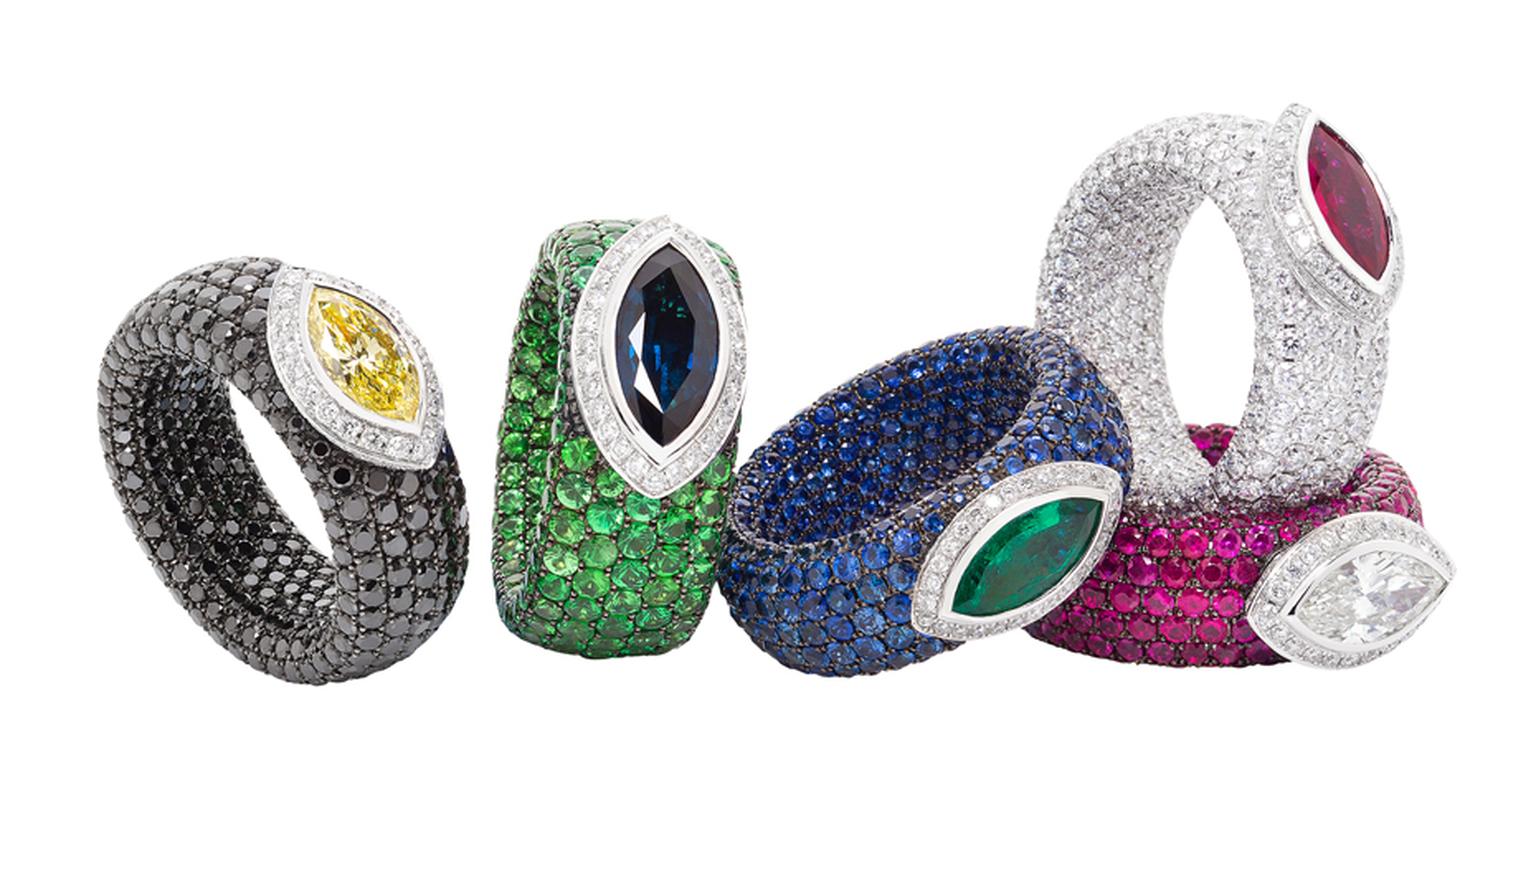 Avakian's new Caché rings have been designed so that they can also be worn as pendants